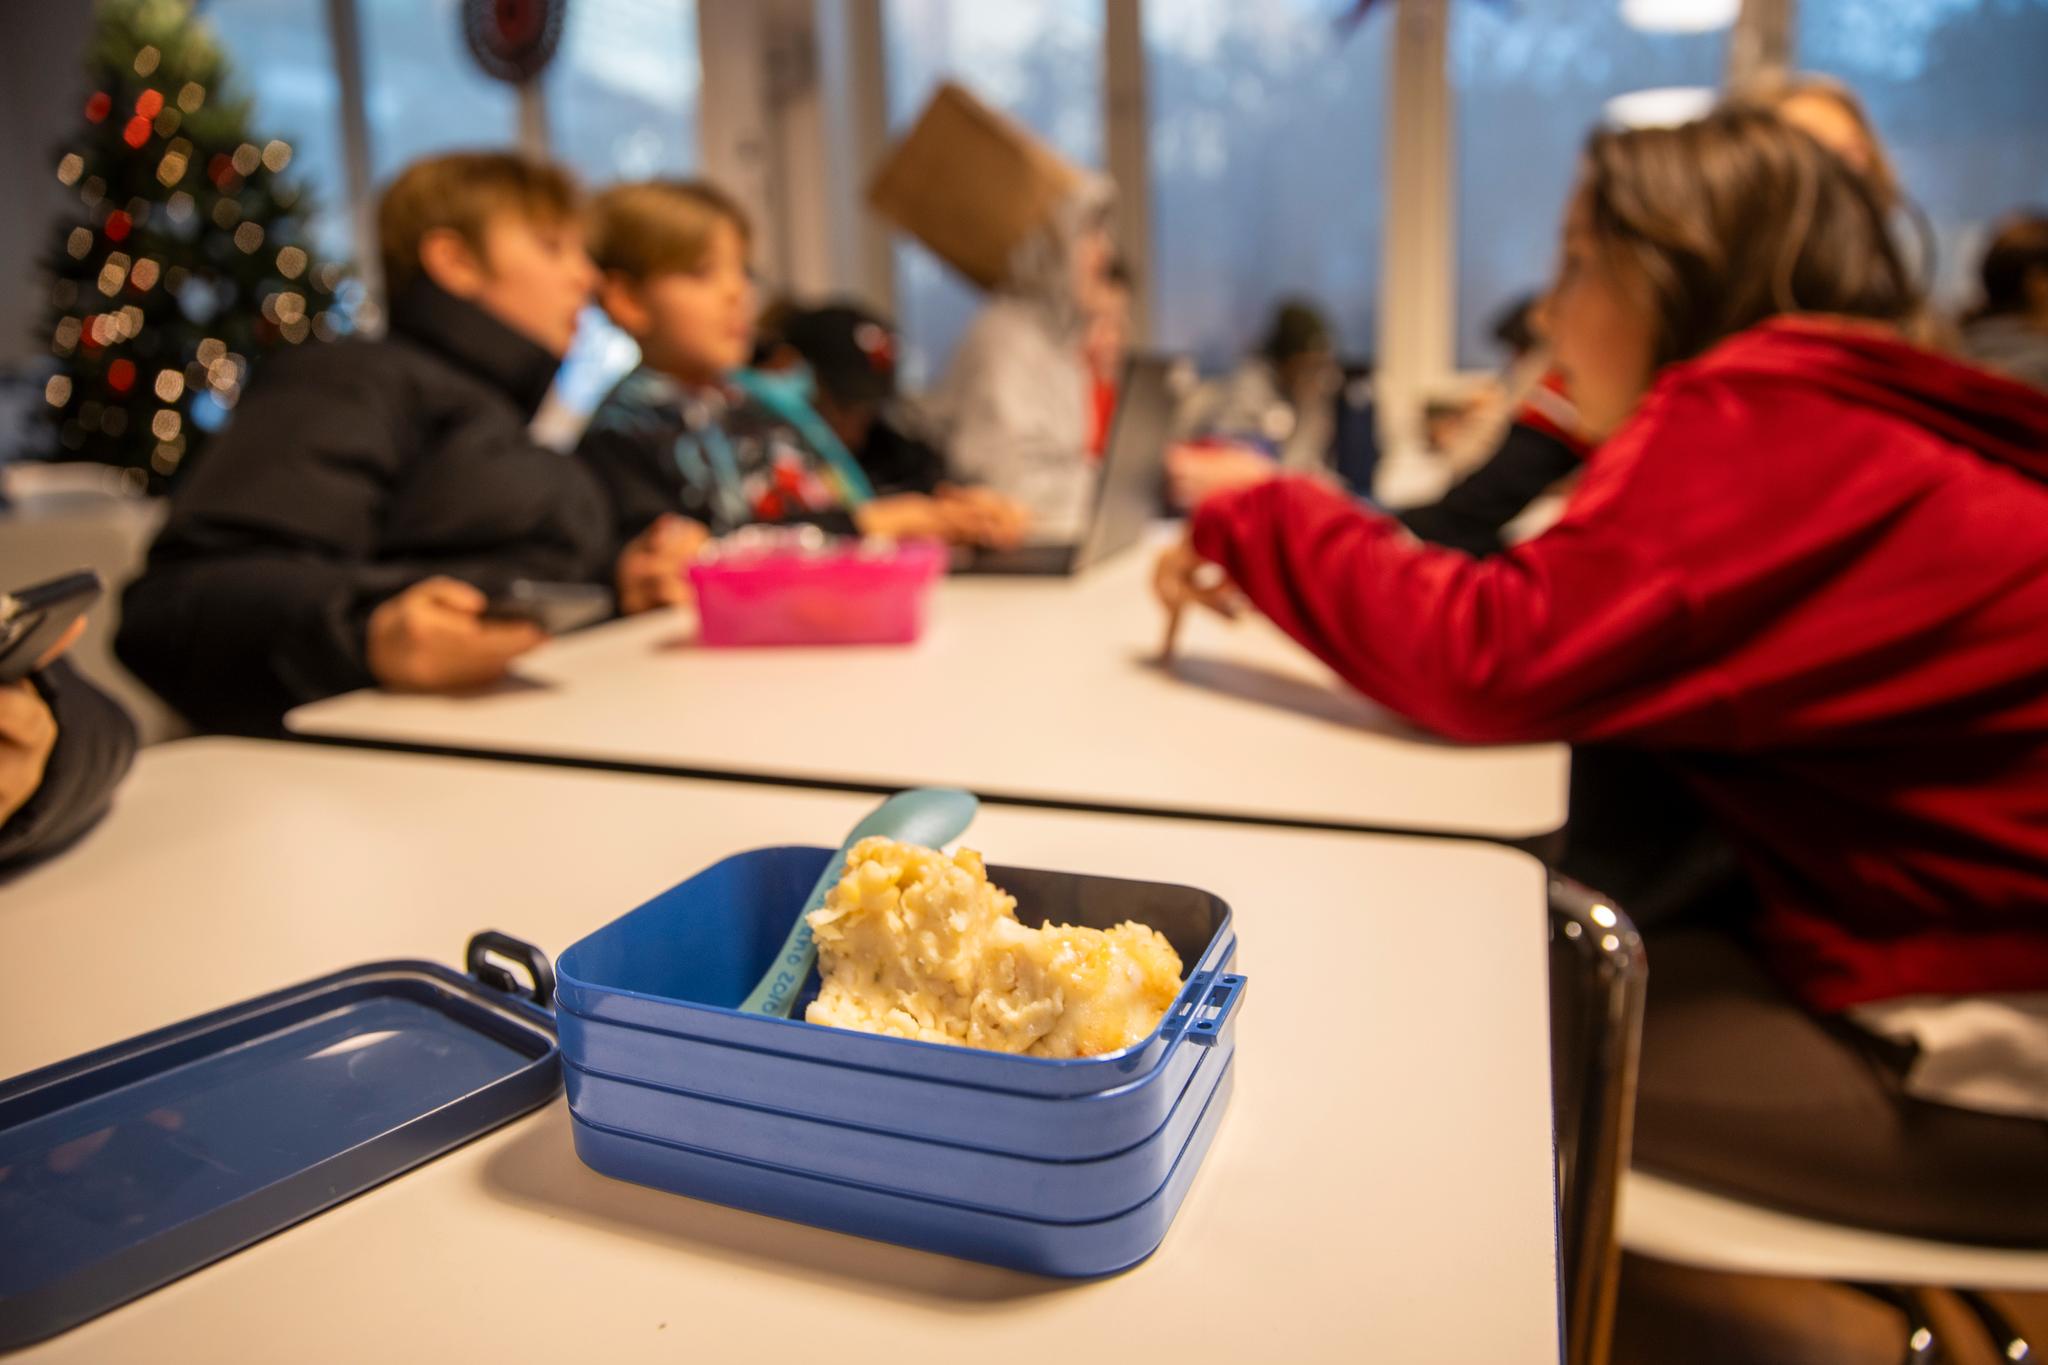 Government Fails to Deliver Promised Free School Meals in Norway, Affecting 75,000 Students